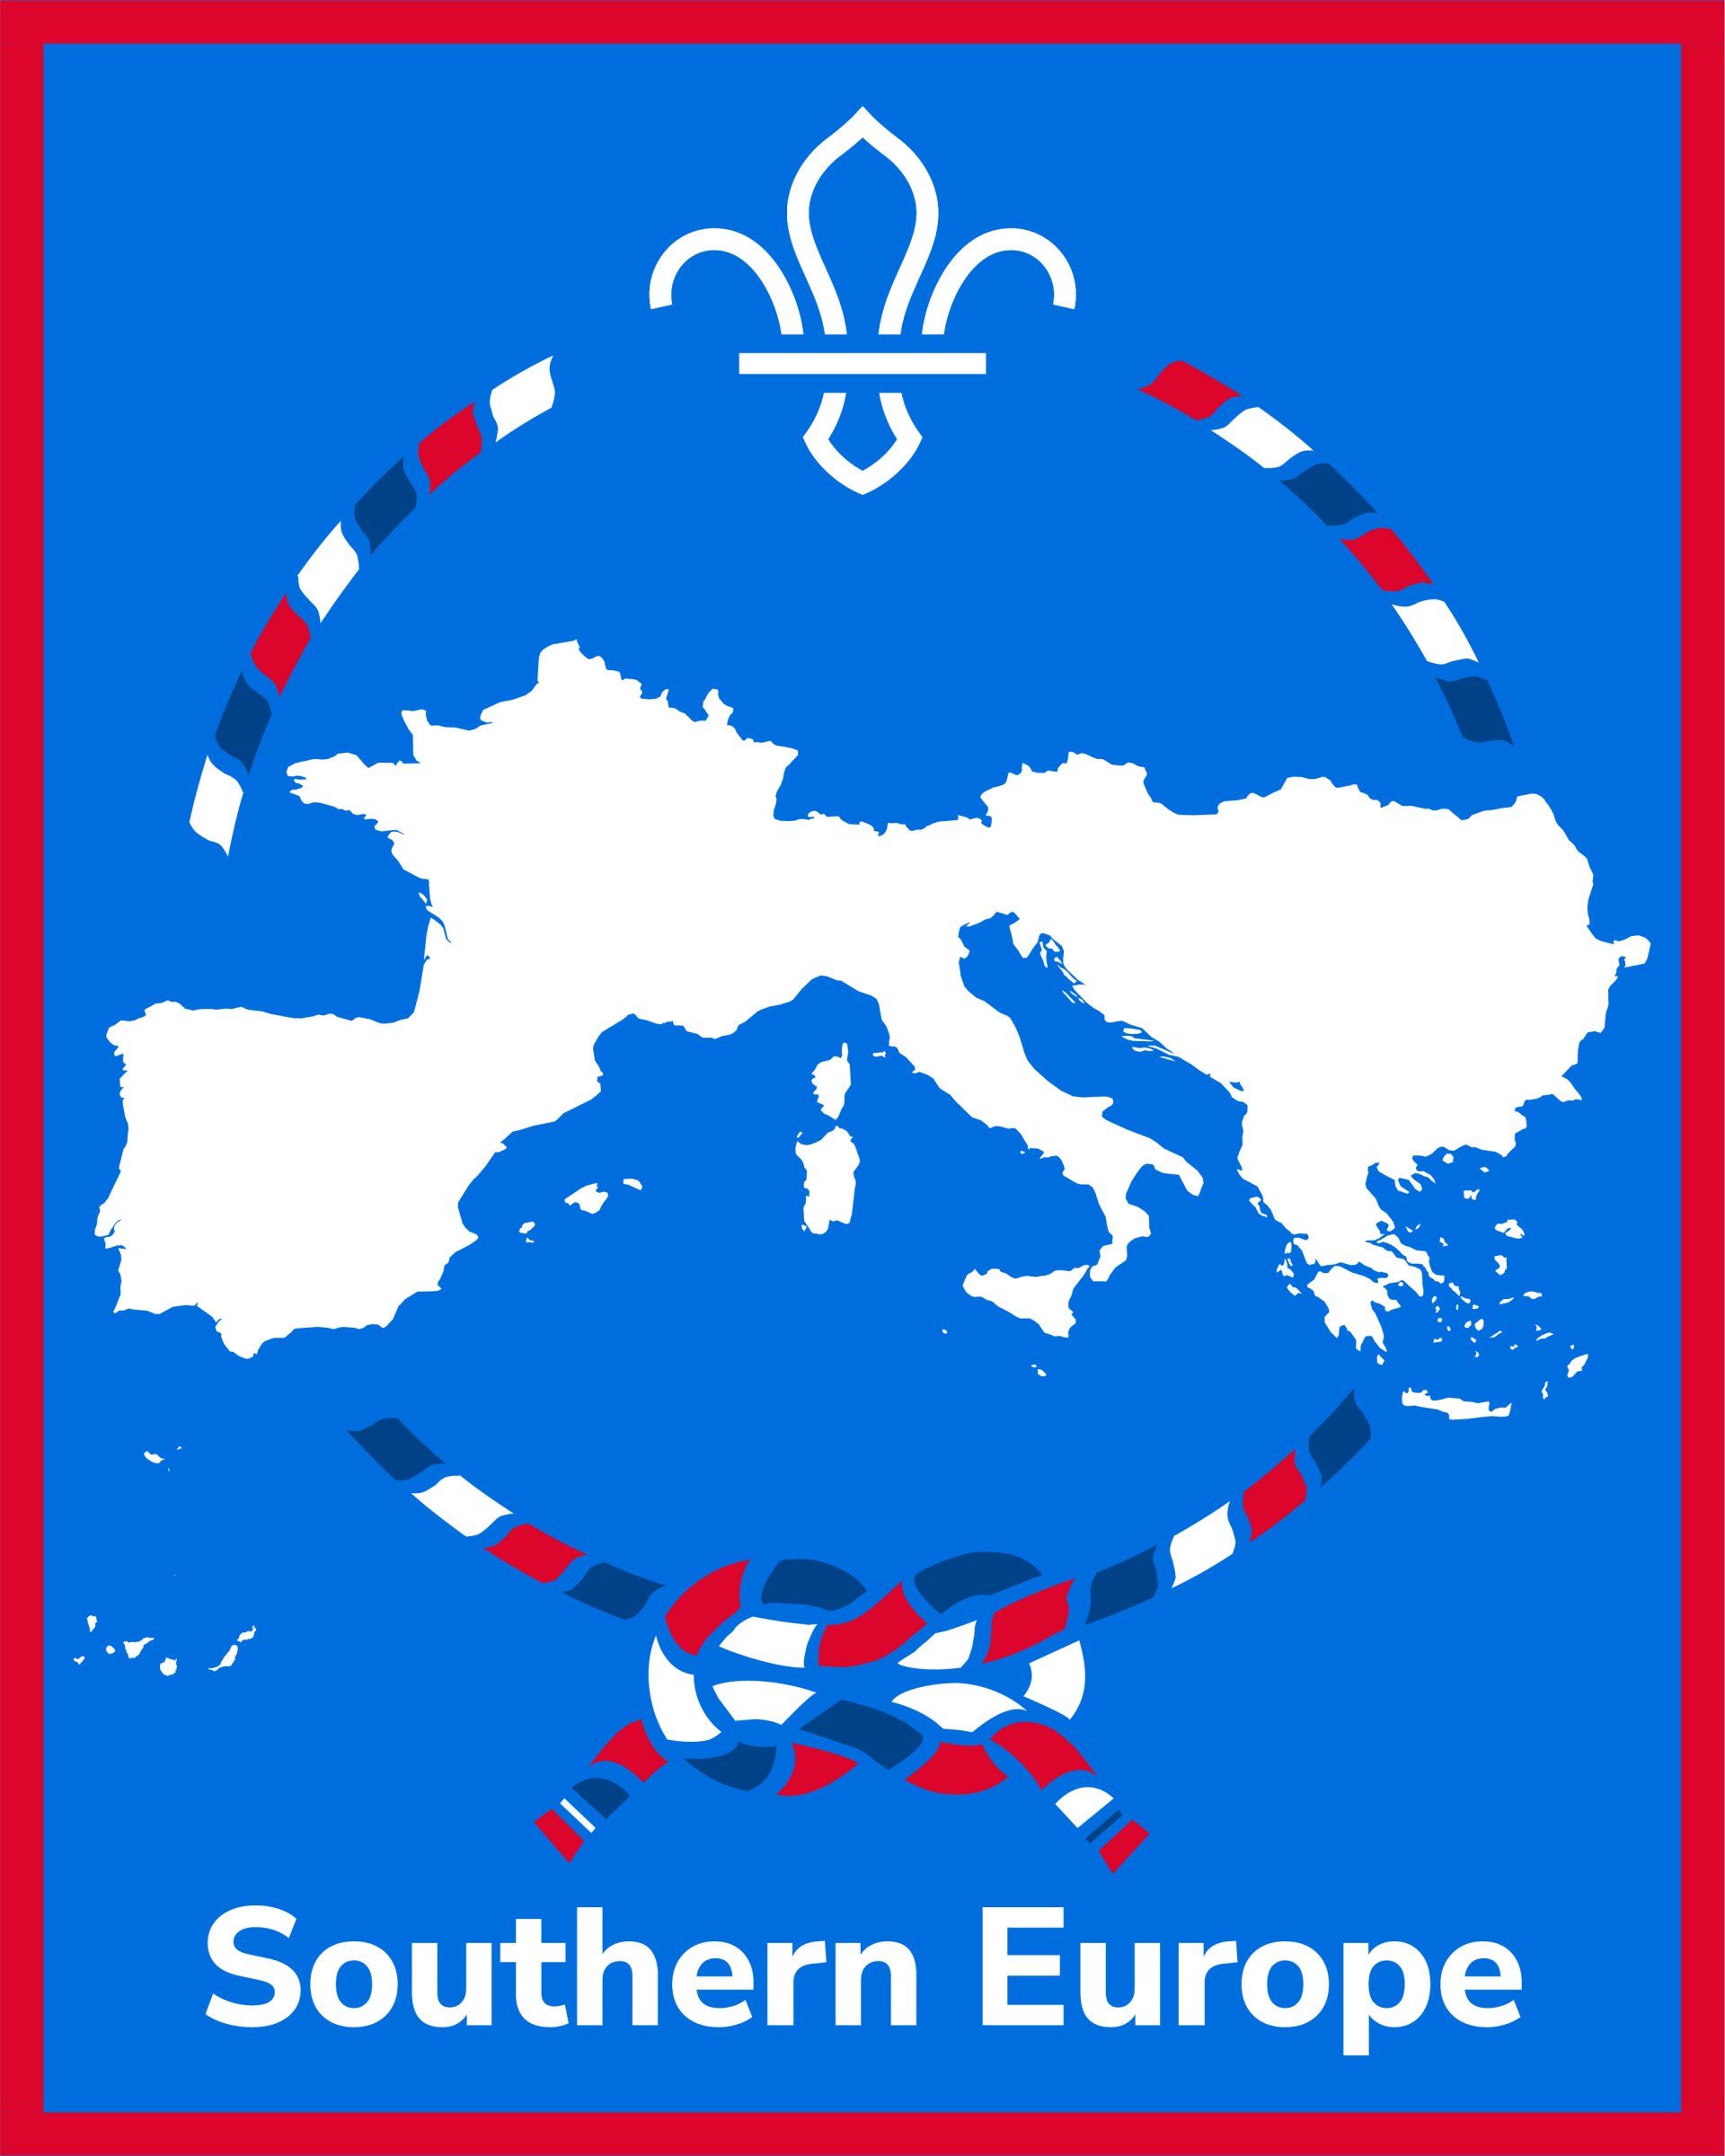 The Southern Europe district badge